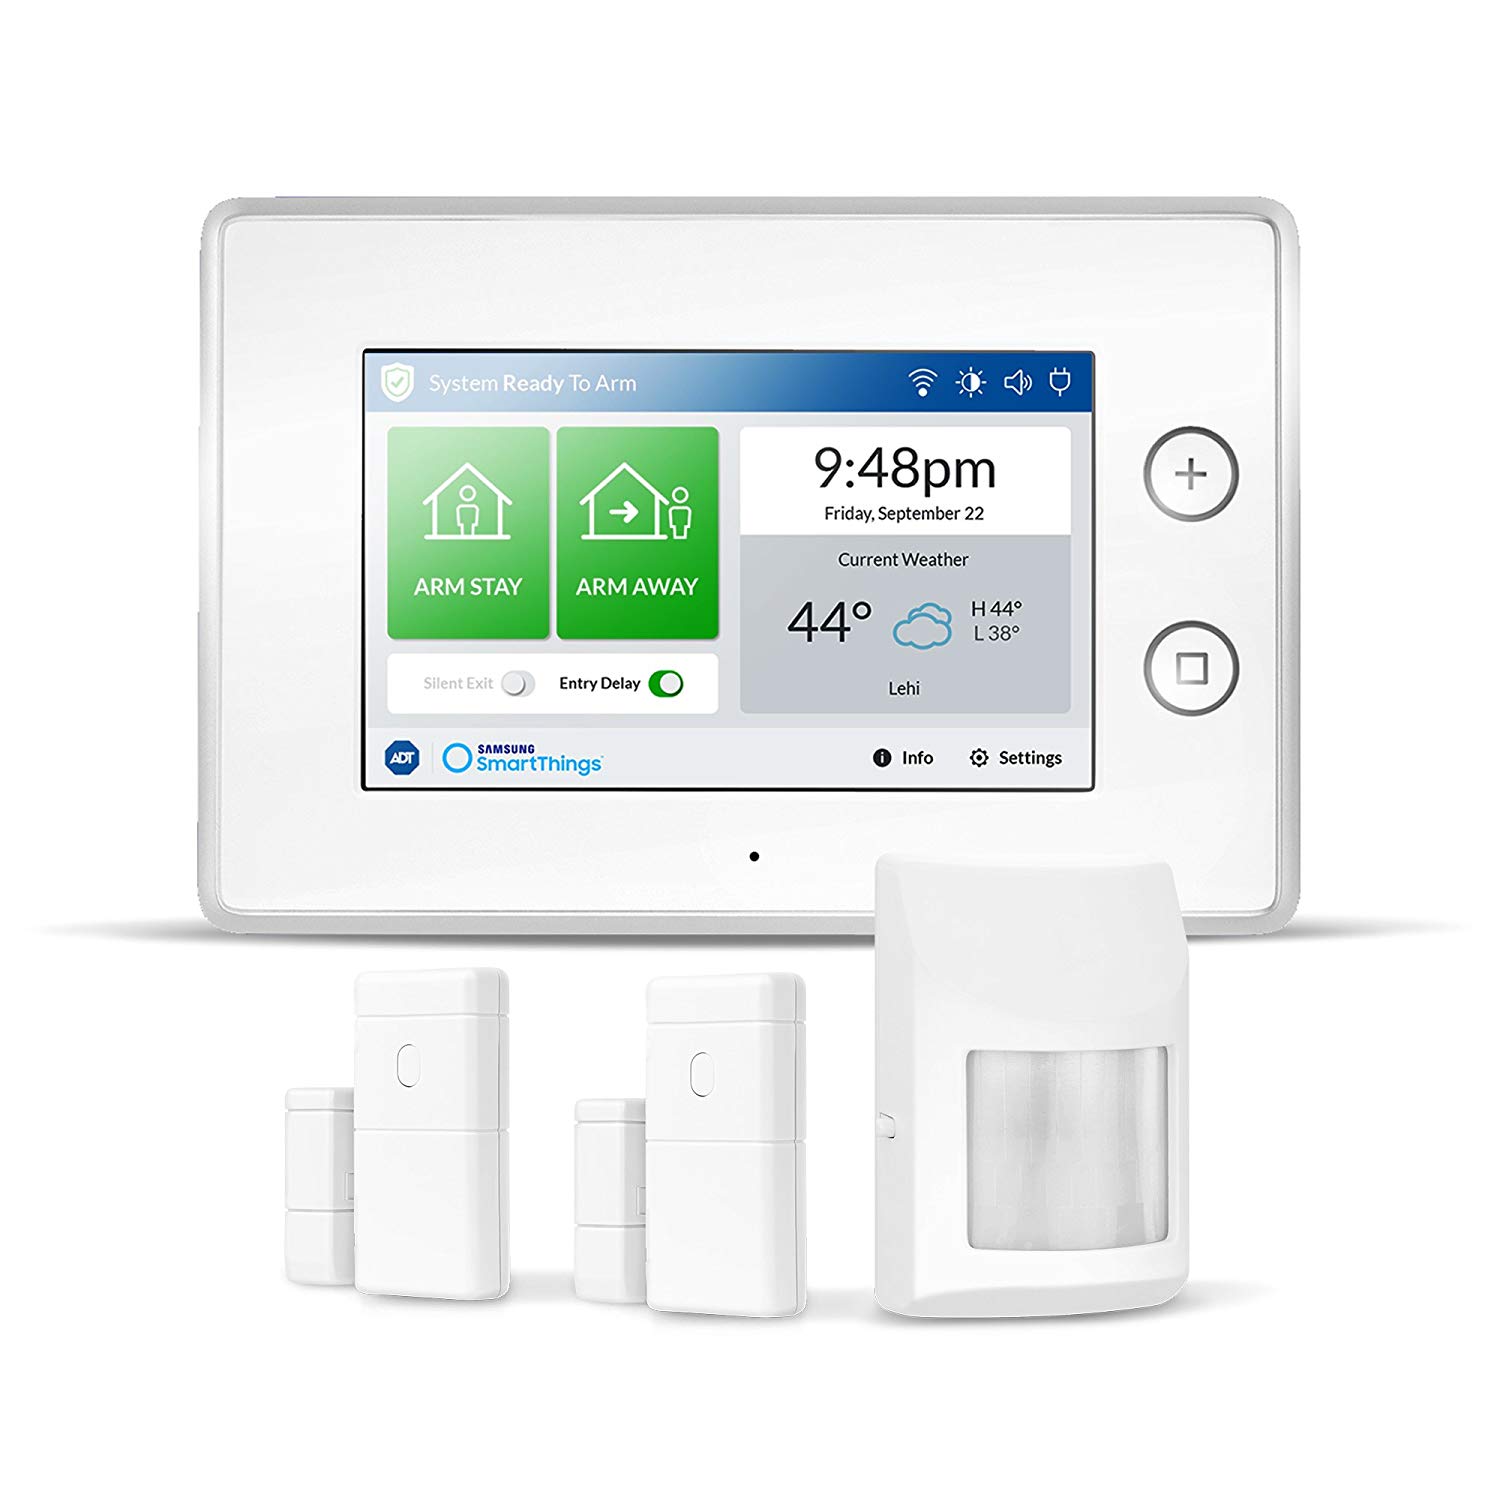 Samsung SmartThings ADT Wireless Home Security Starter Kit with DIY Smart Alarm System Hub, Door and Window Sensors, and Motion Detector - Alexa Compatible (Zigbee, Z-Wave, IP Network Protocols)